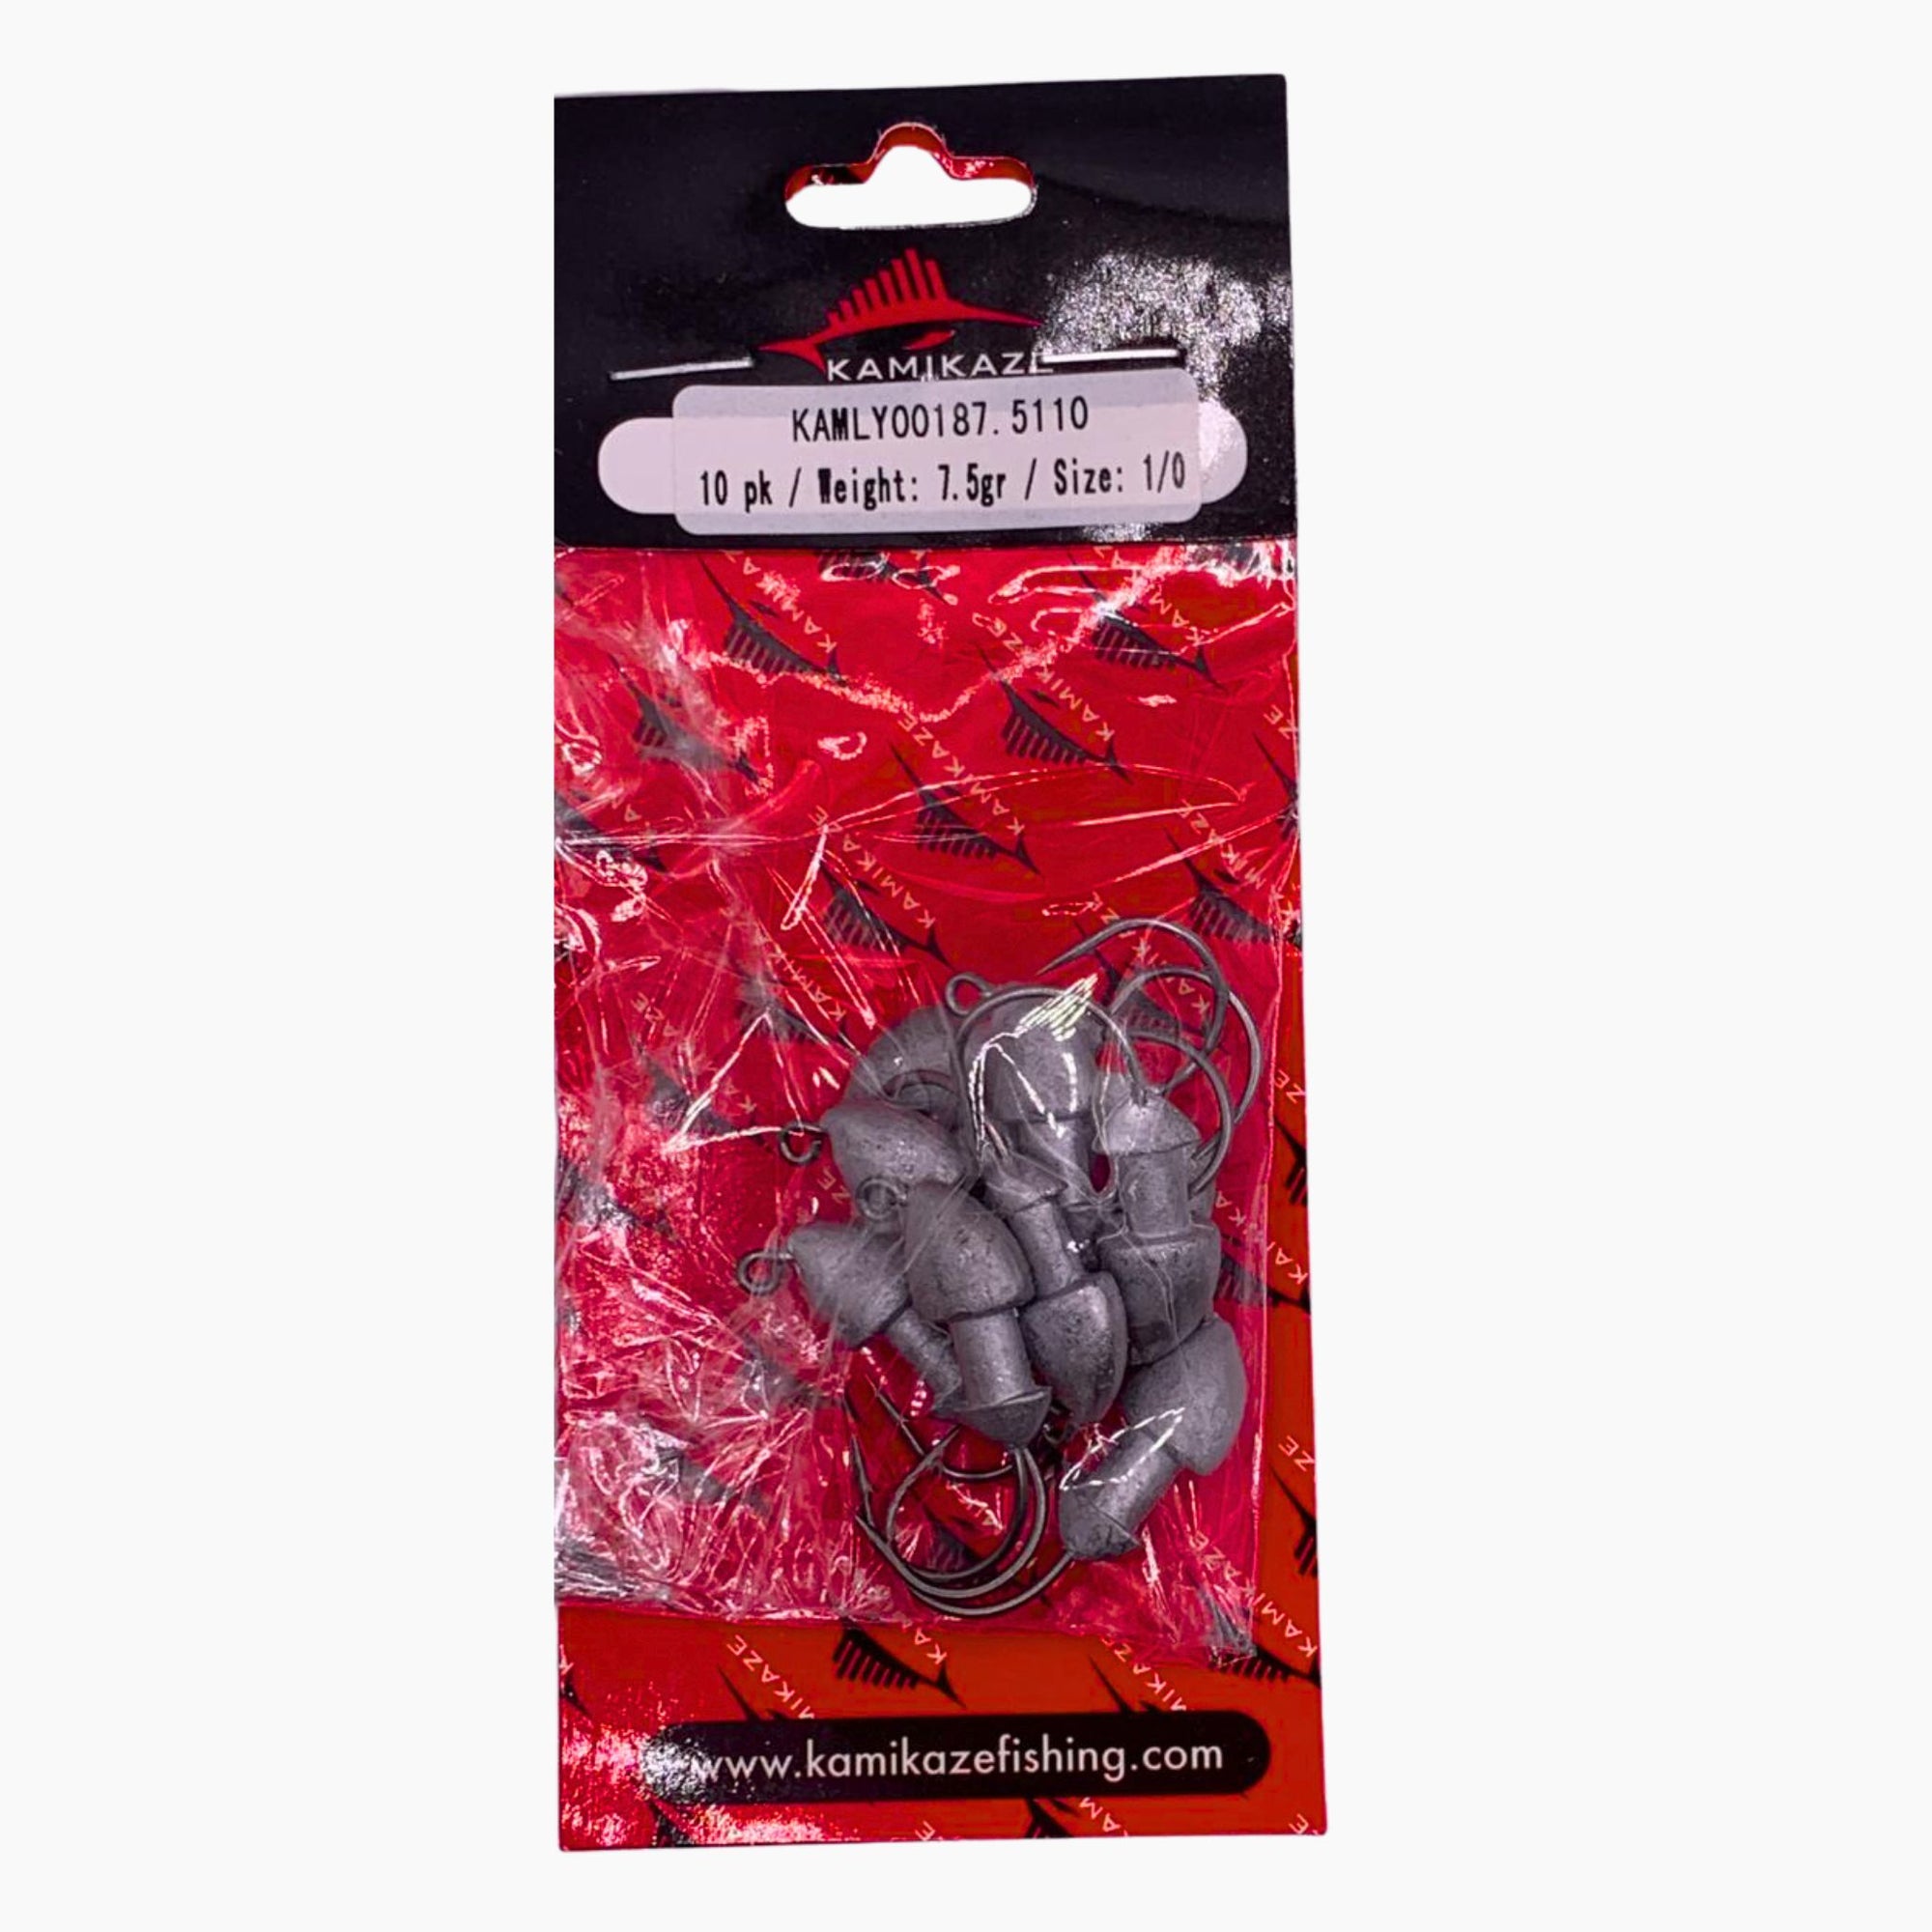 Jig Heads | Weight 7.5grams | Size: 1/0 | Pack of 10 - South East Clearance Centre